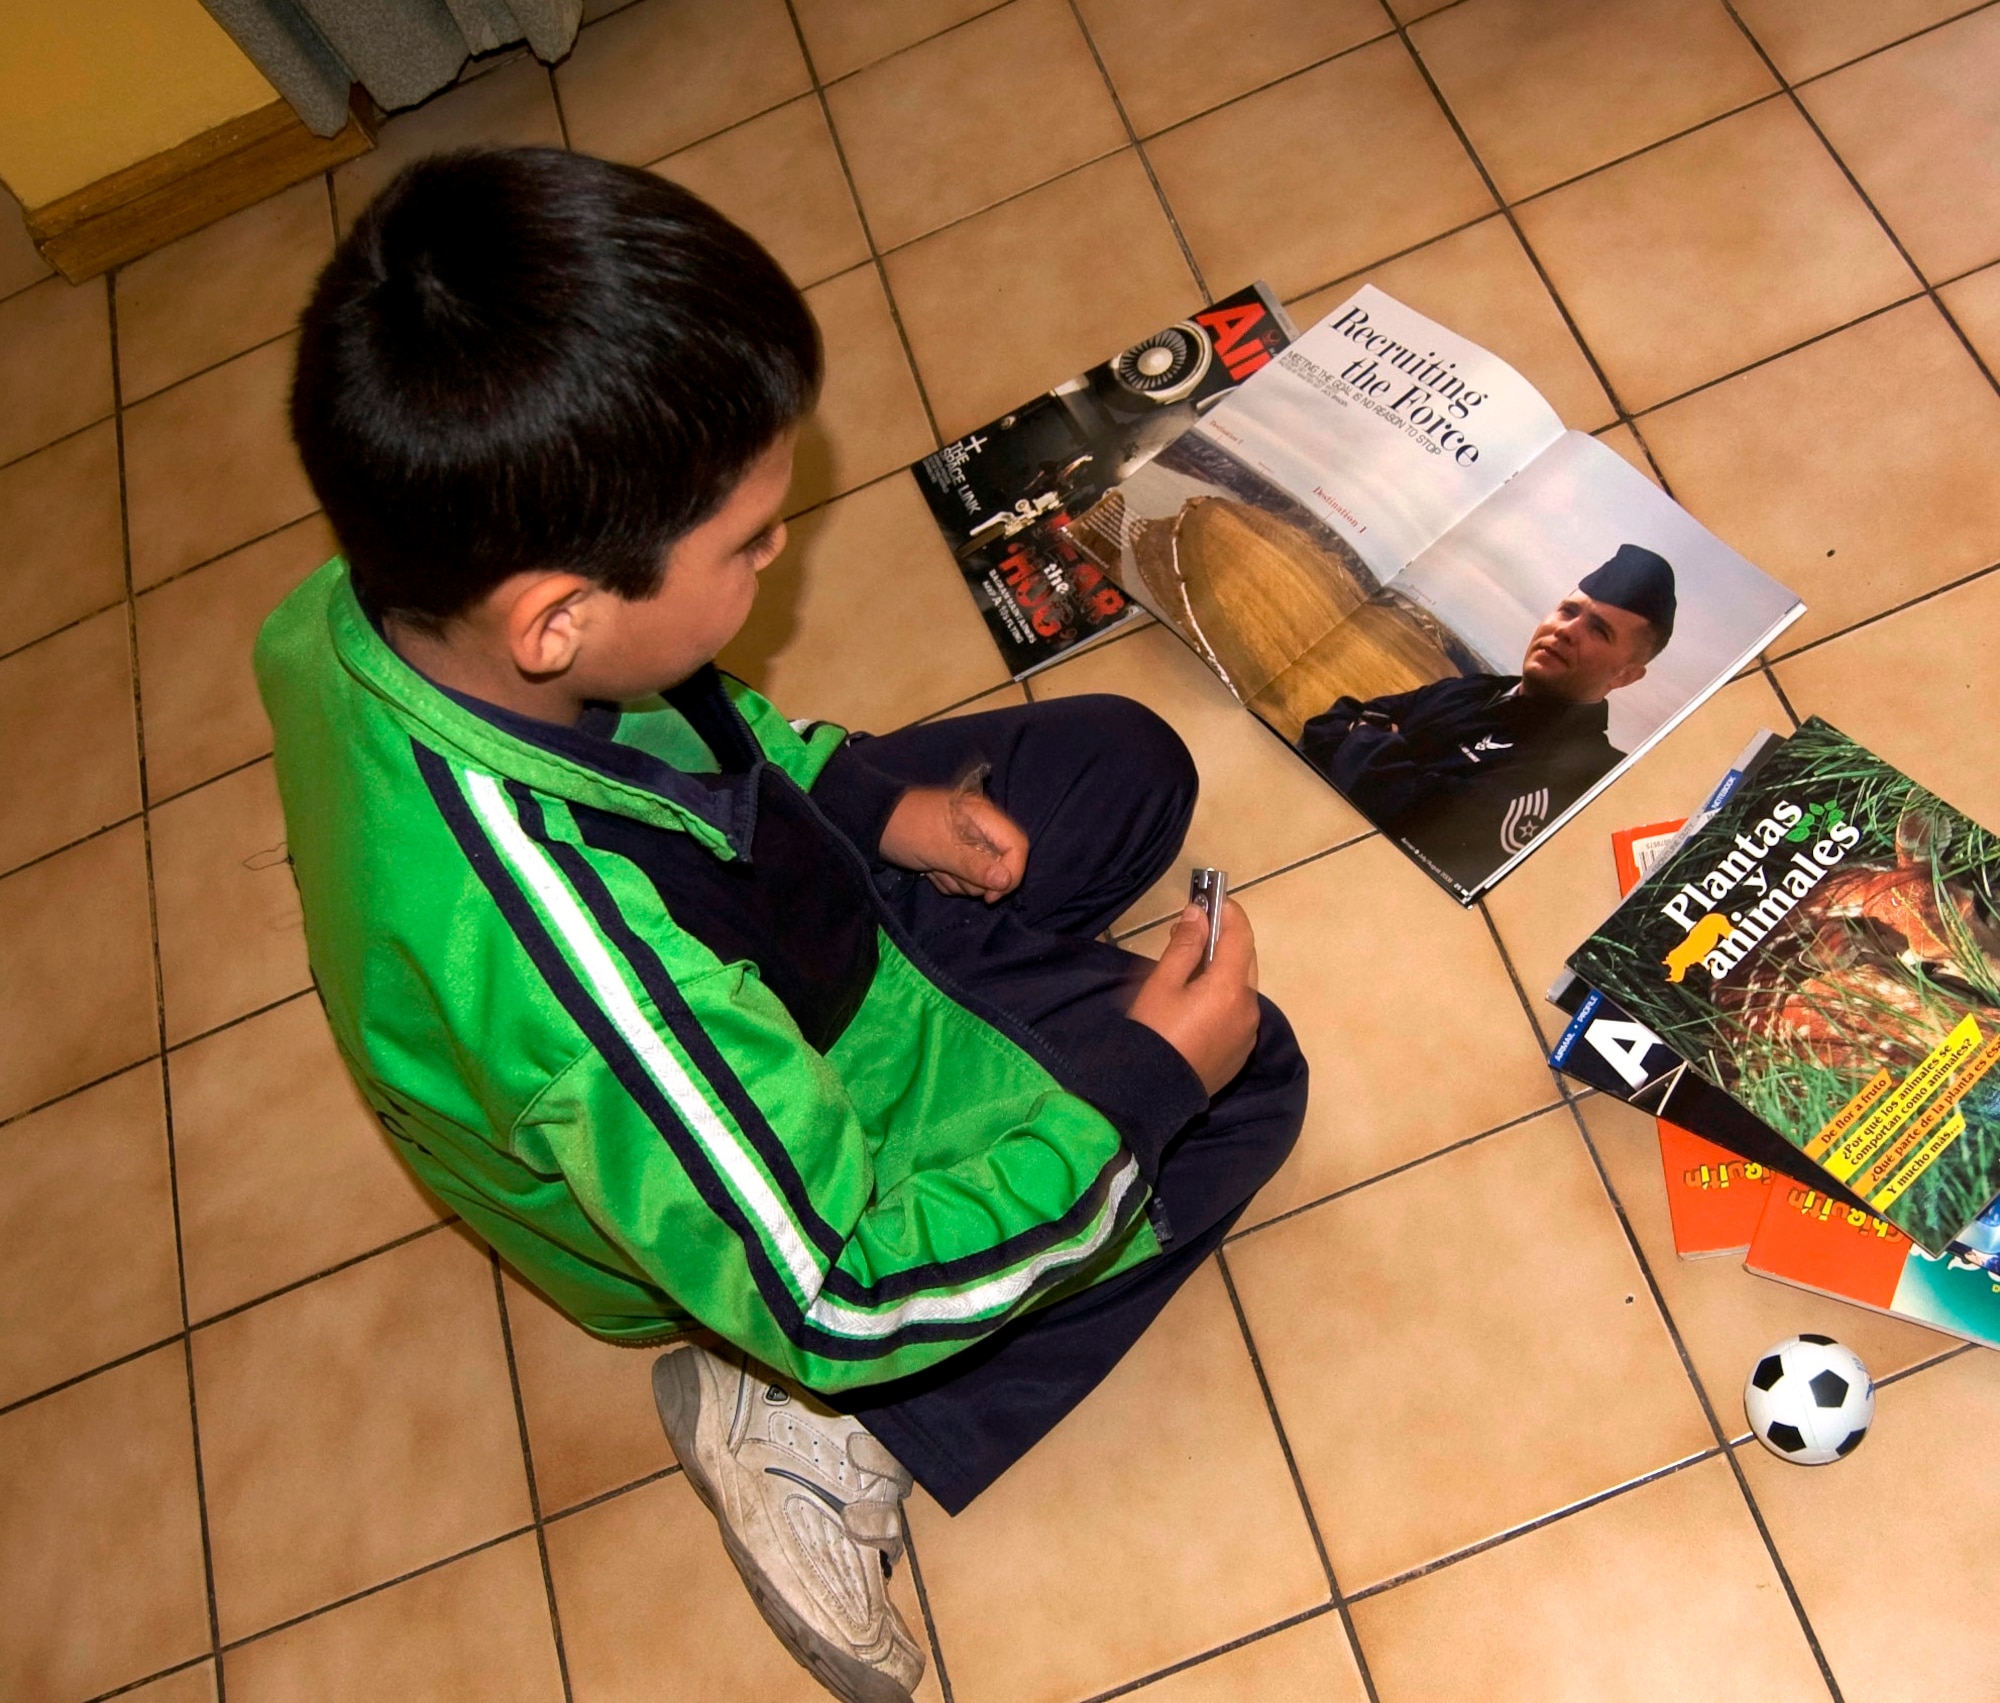 A Chilean boy looks at the U.S. Air Forces “Airmen Magazine” during a visit Oct. 29 by Airmen, a Soldier and U.S. civilian volunteers to the ALDEAS SOS orphanage in Santiago, Chile for a cultural exchange of food and camaraderie as part of Operation Southern Partner -- a Twelfth Air Force (Air Forces Southern) led event aimed at providing intensive, periodic subject-matter exchanges in the U.S. Southern Command area of focus. (Air Force photo\Master Sgt. Eric M. Grill)